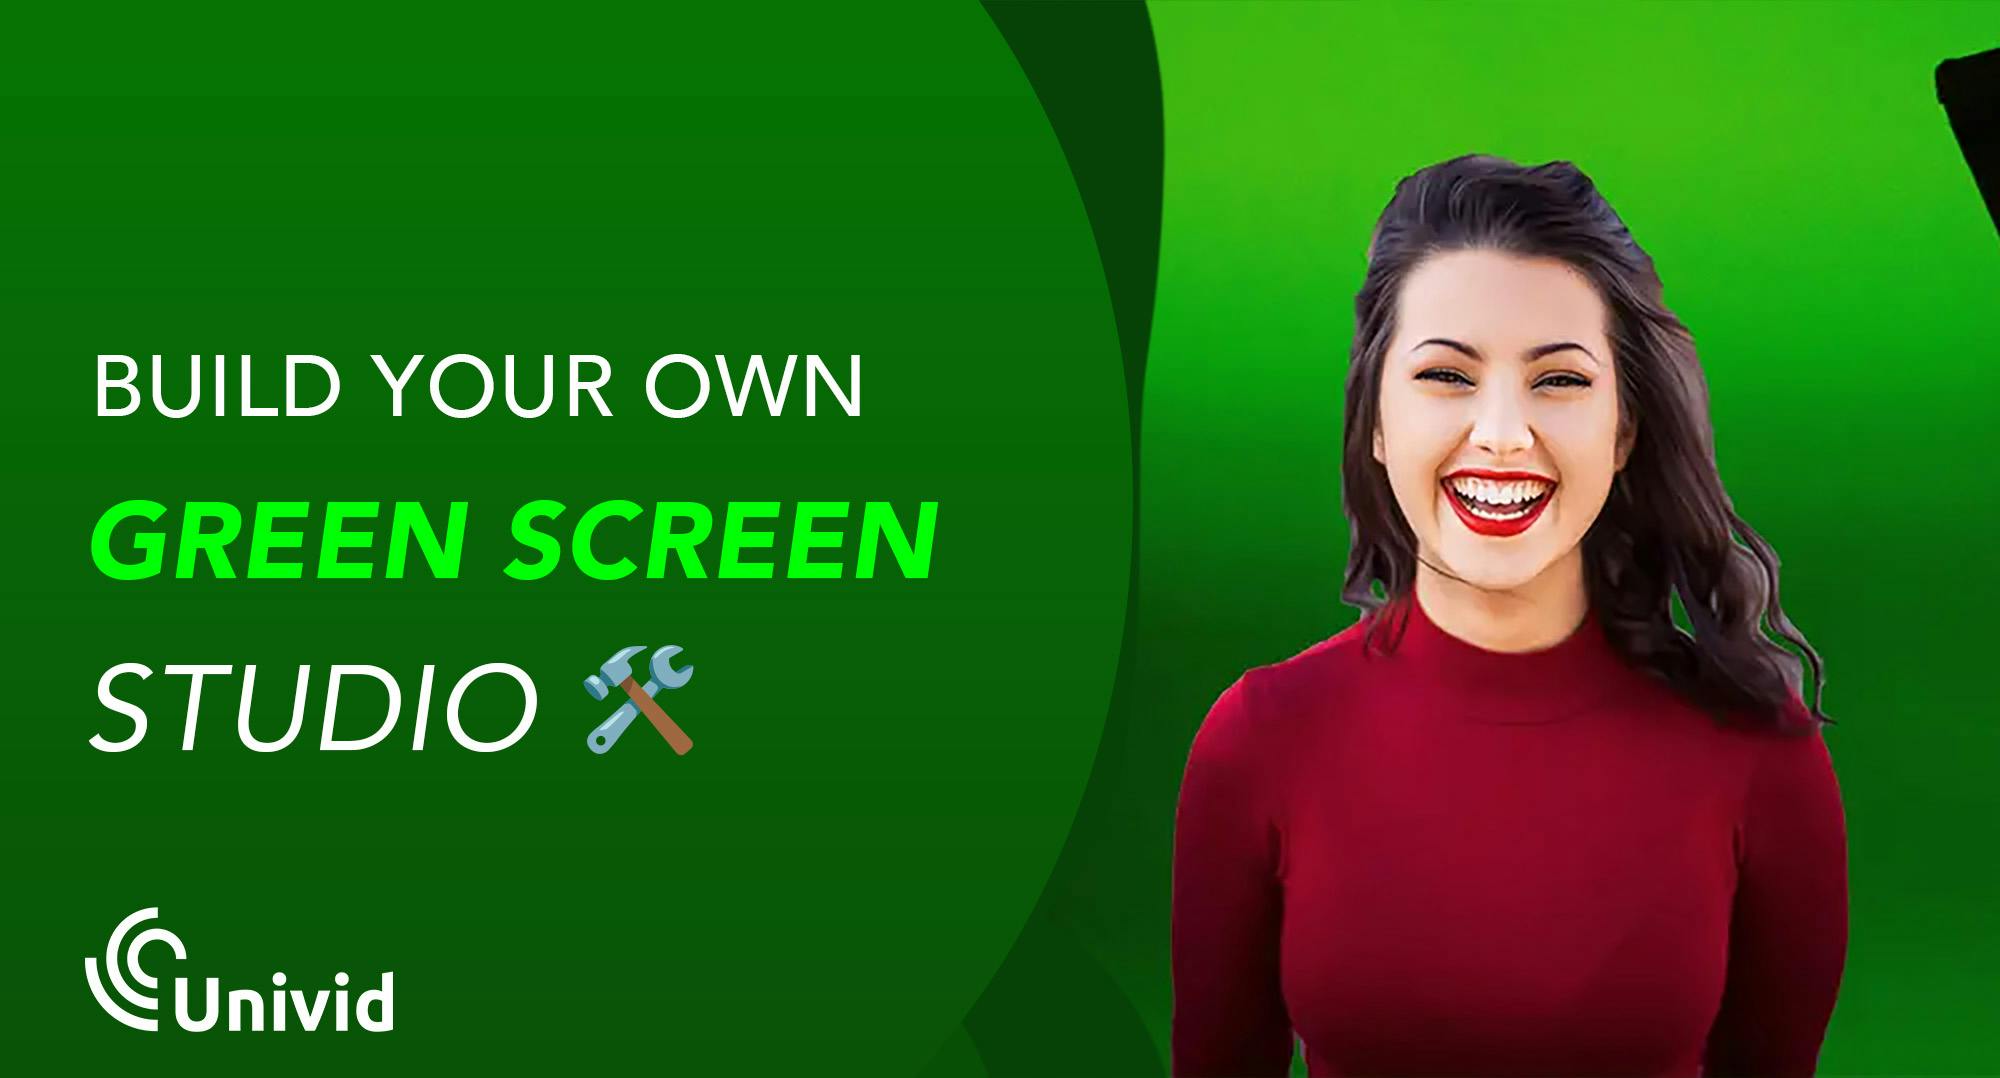 Building a green screen studio does not require more than a green fabric as a background and an app or application on your laptop. We go through what a green screen is and how it works to set up your own - either for your home or company office studio. You also get 5 tips on what to think of when live streaming with a virtual background.